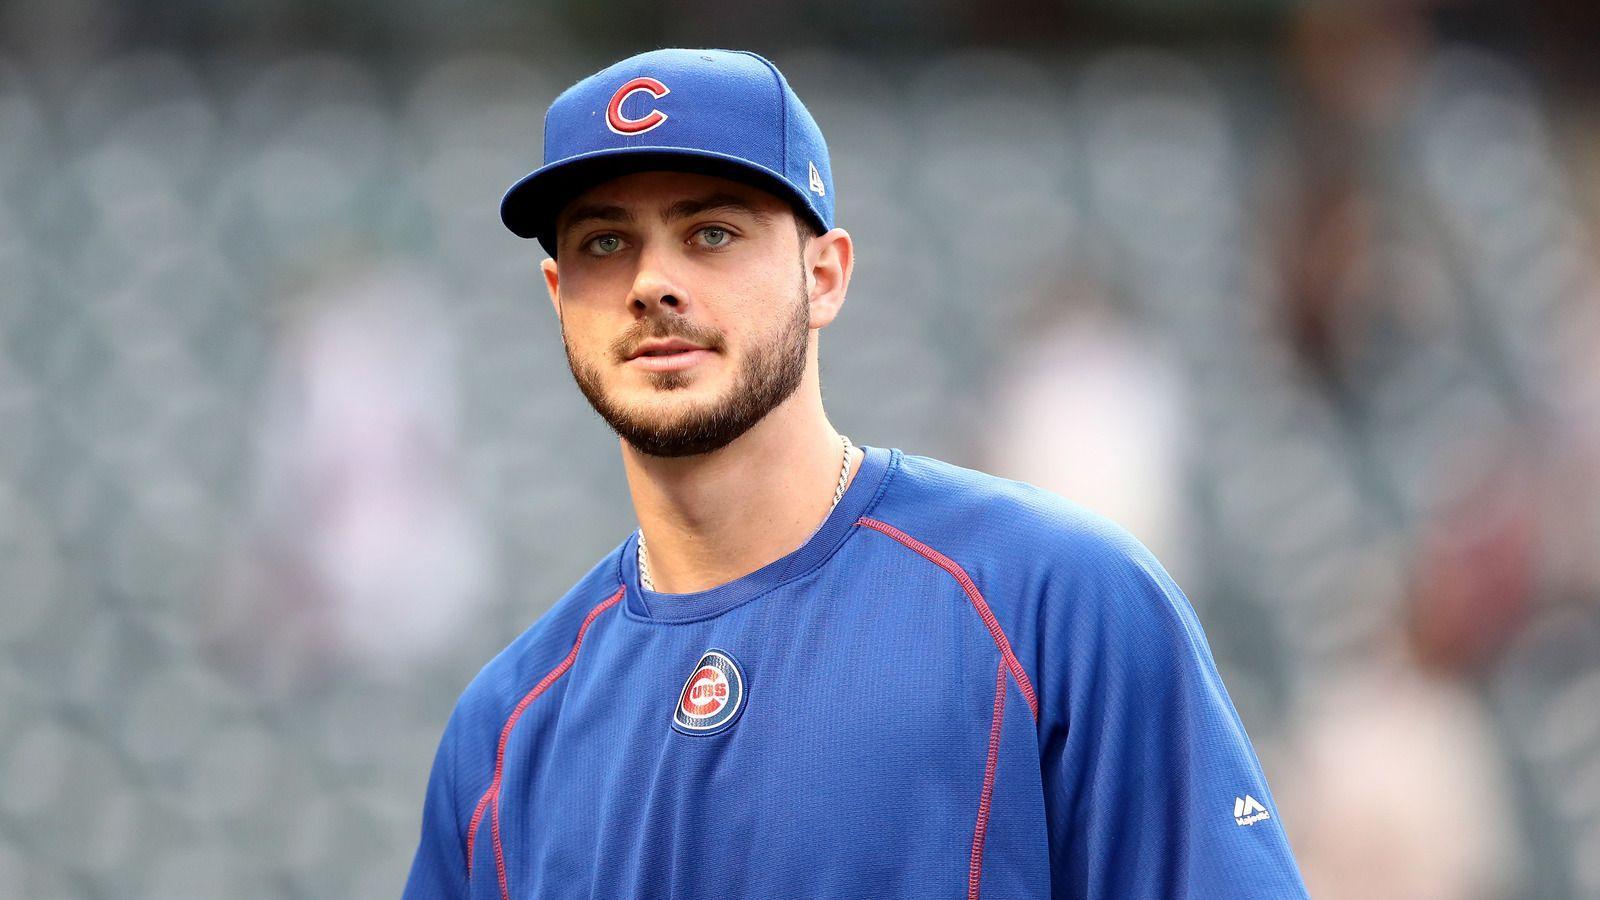 Kris Bryant can become the next Derek Jeter